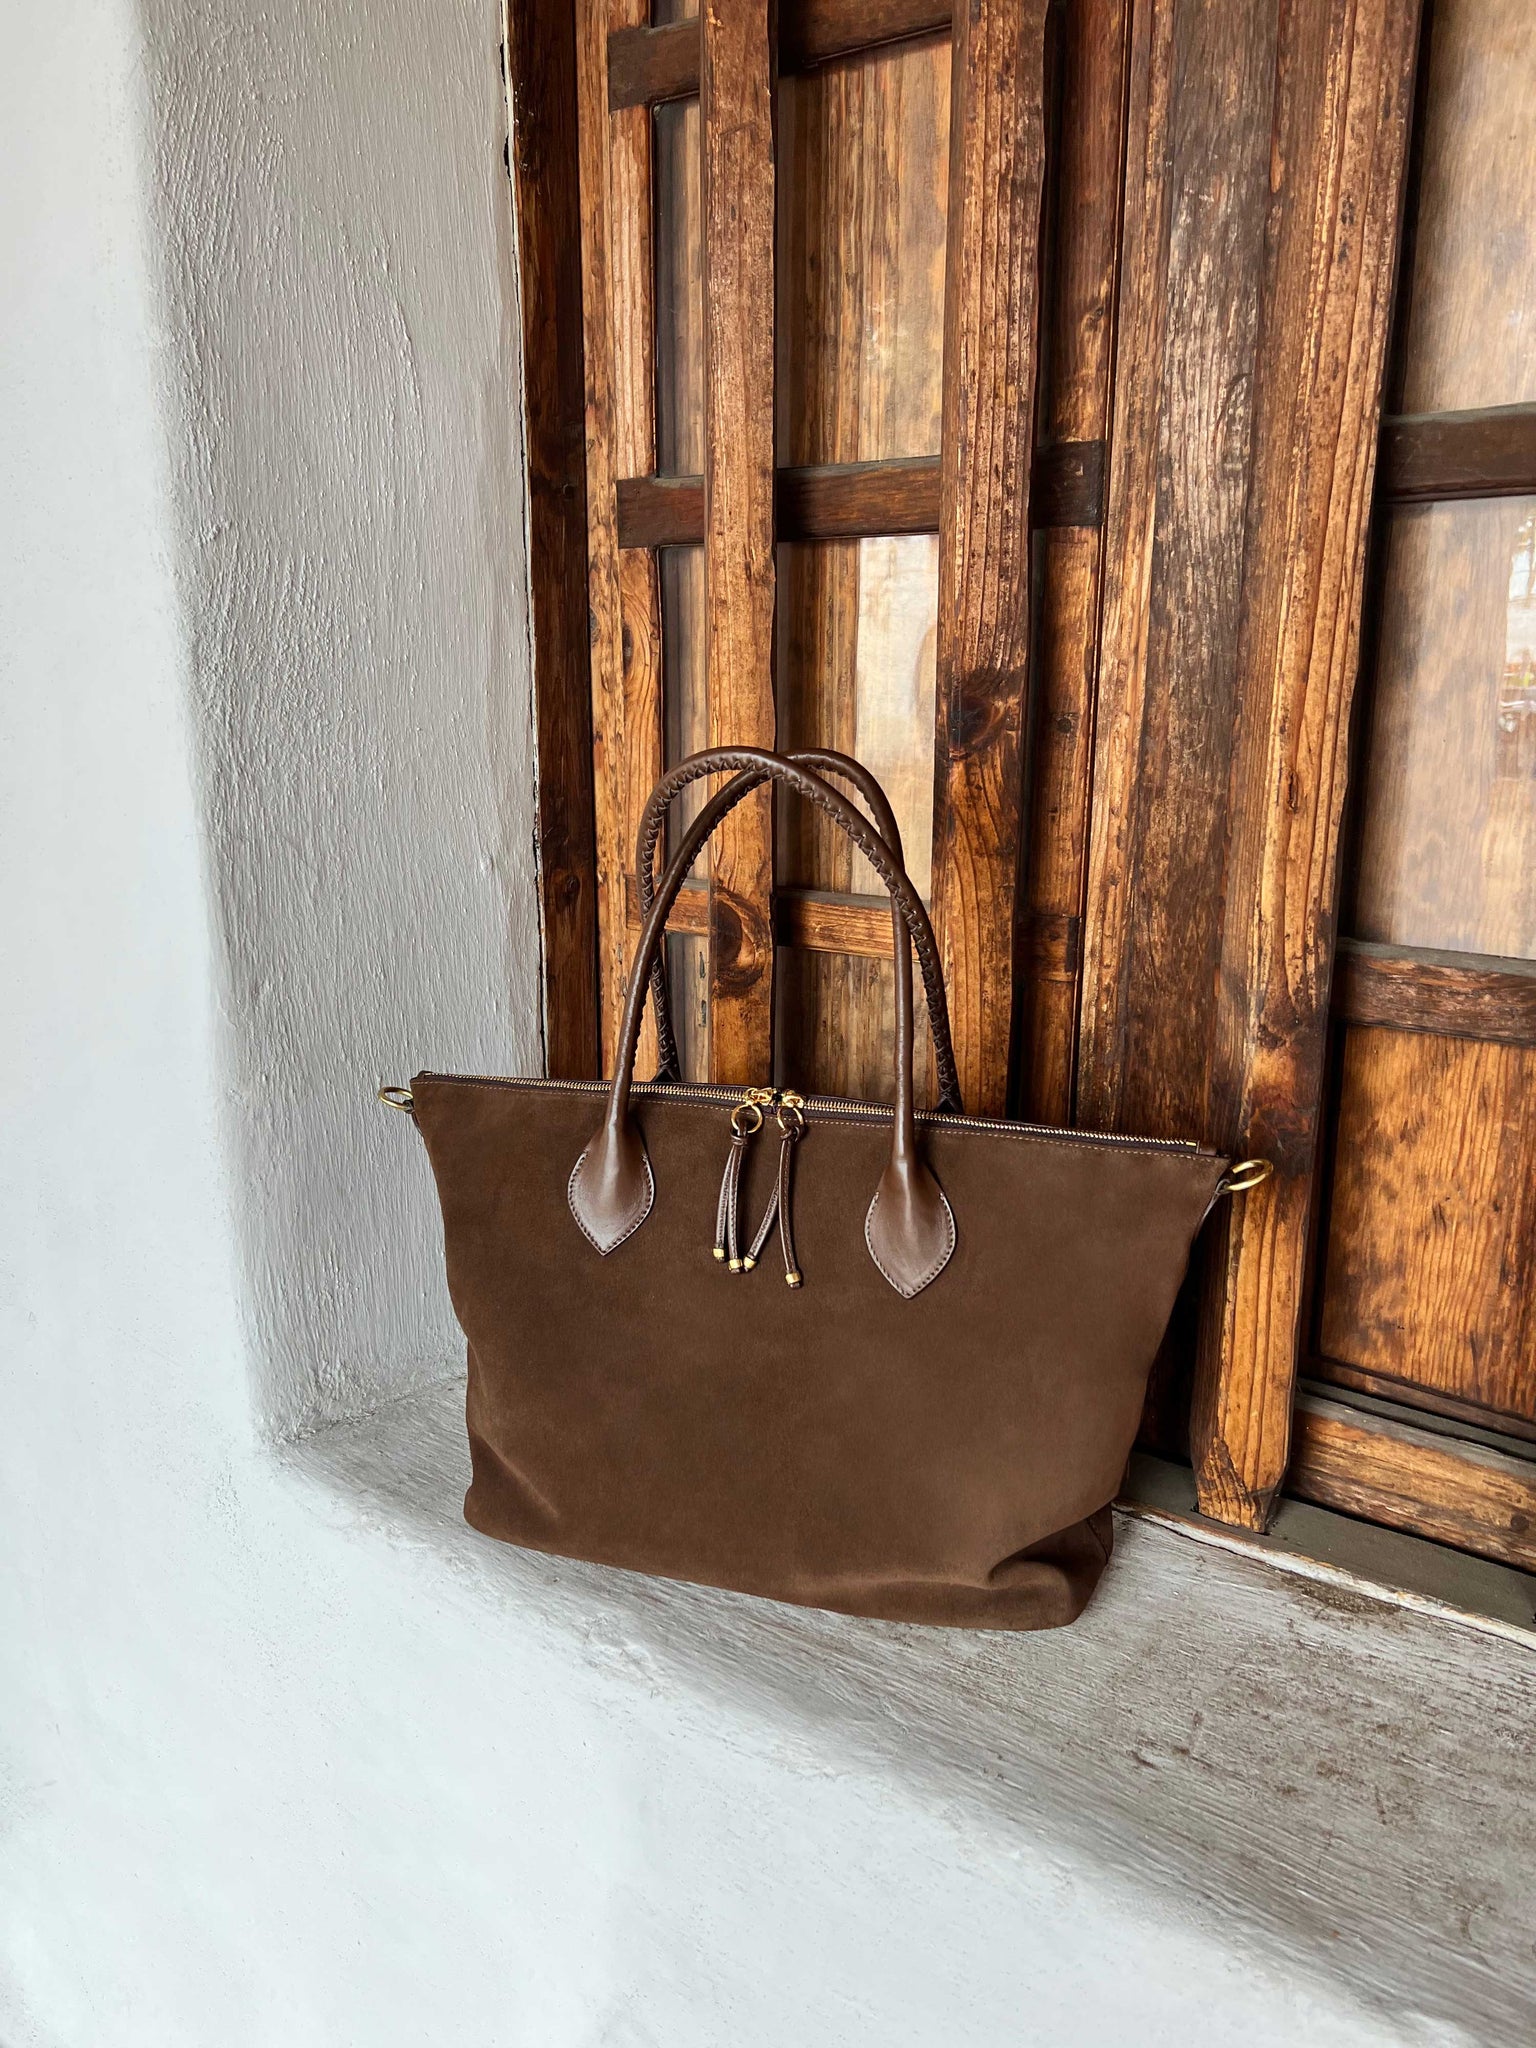 Leather Large Bellport Tote